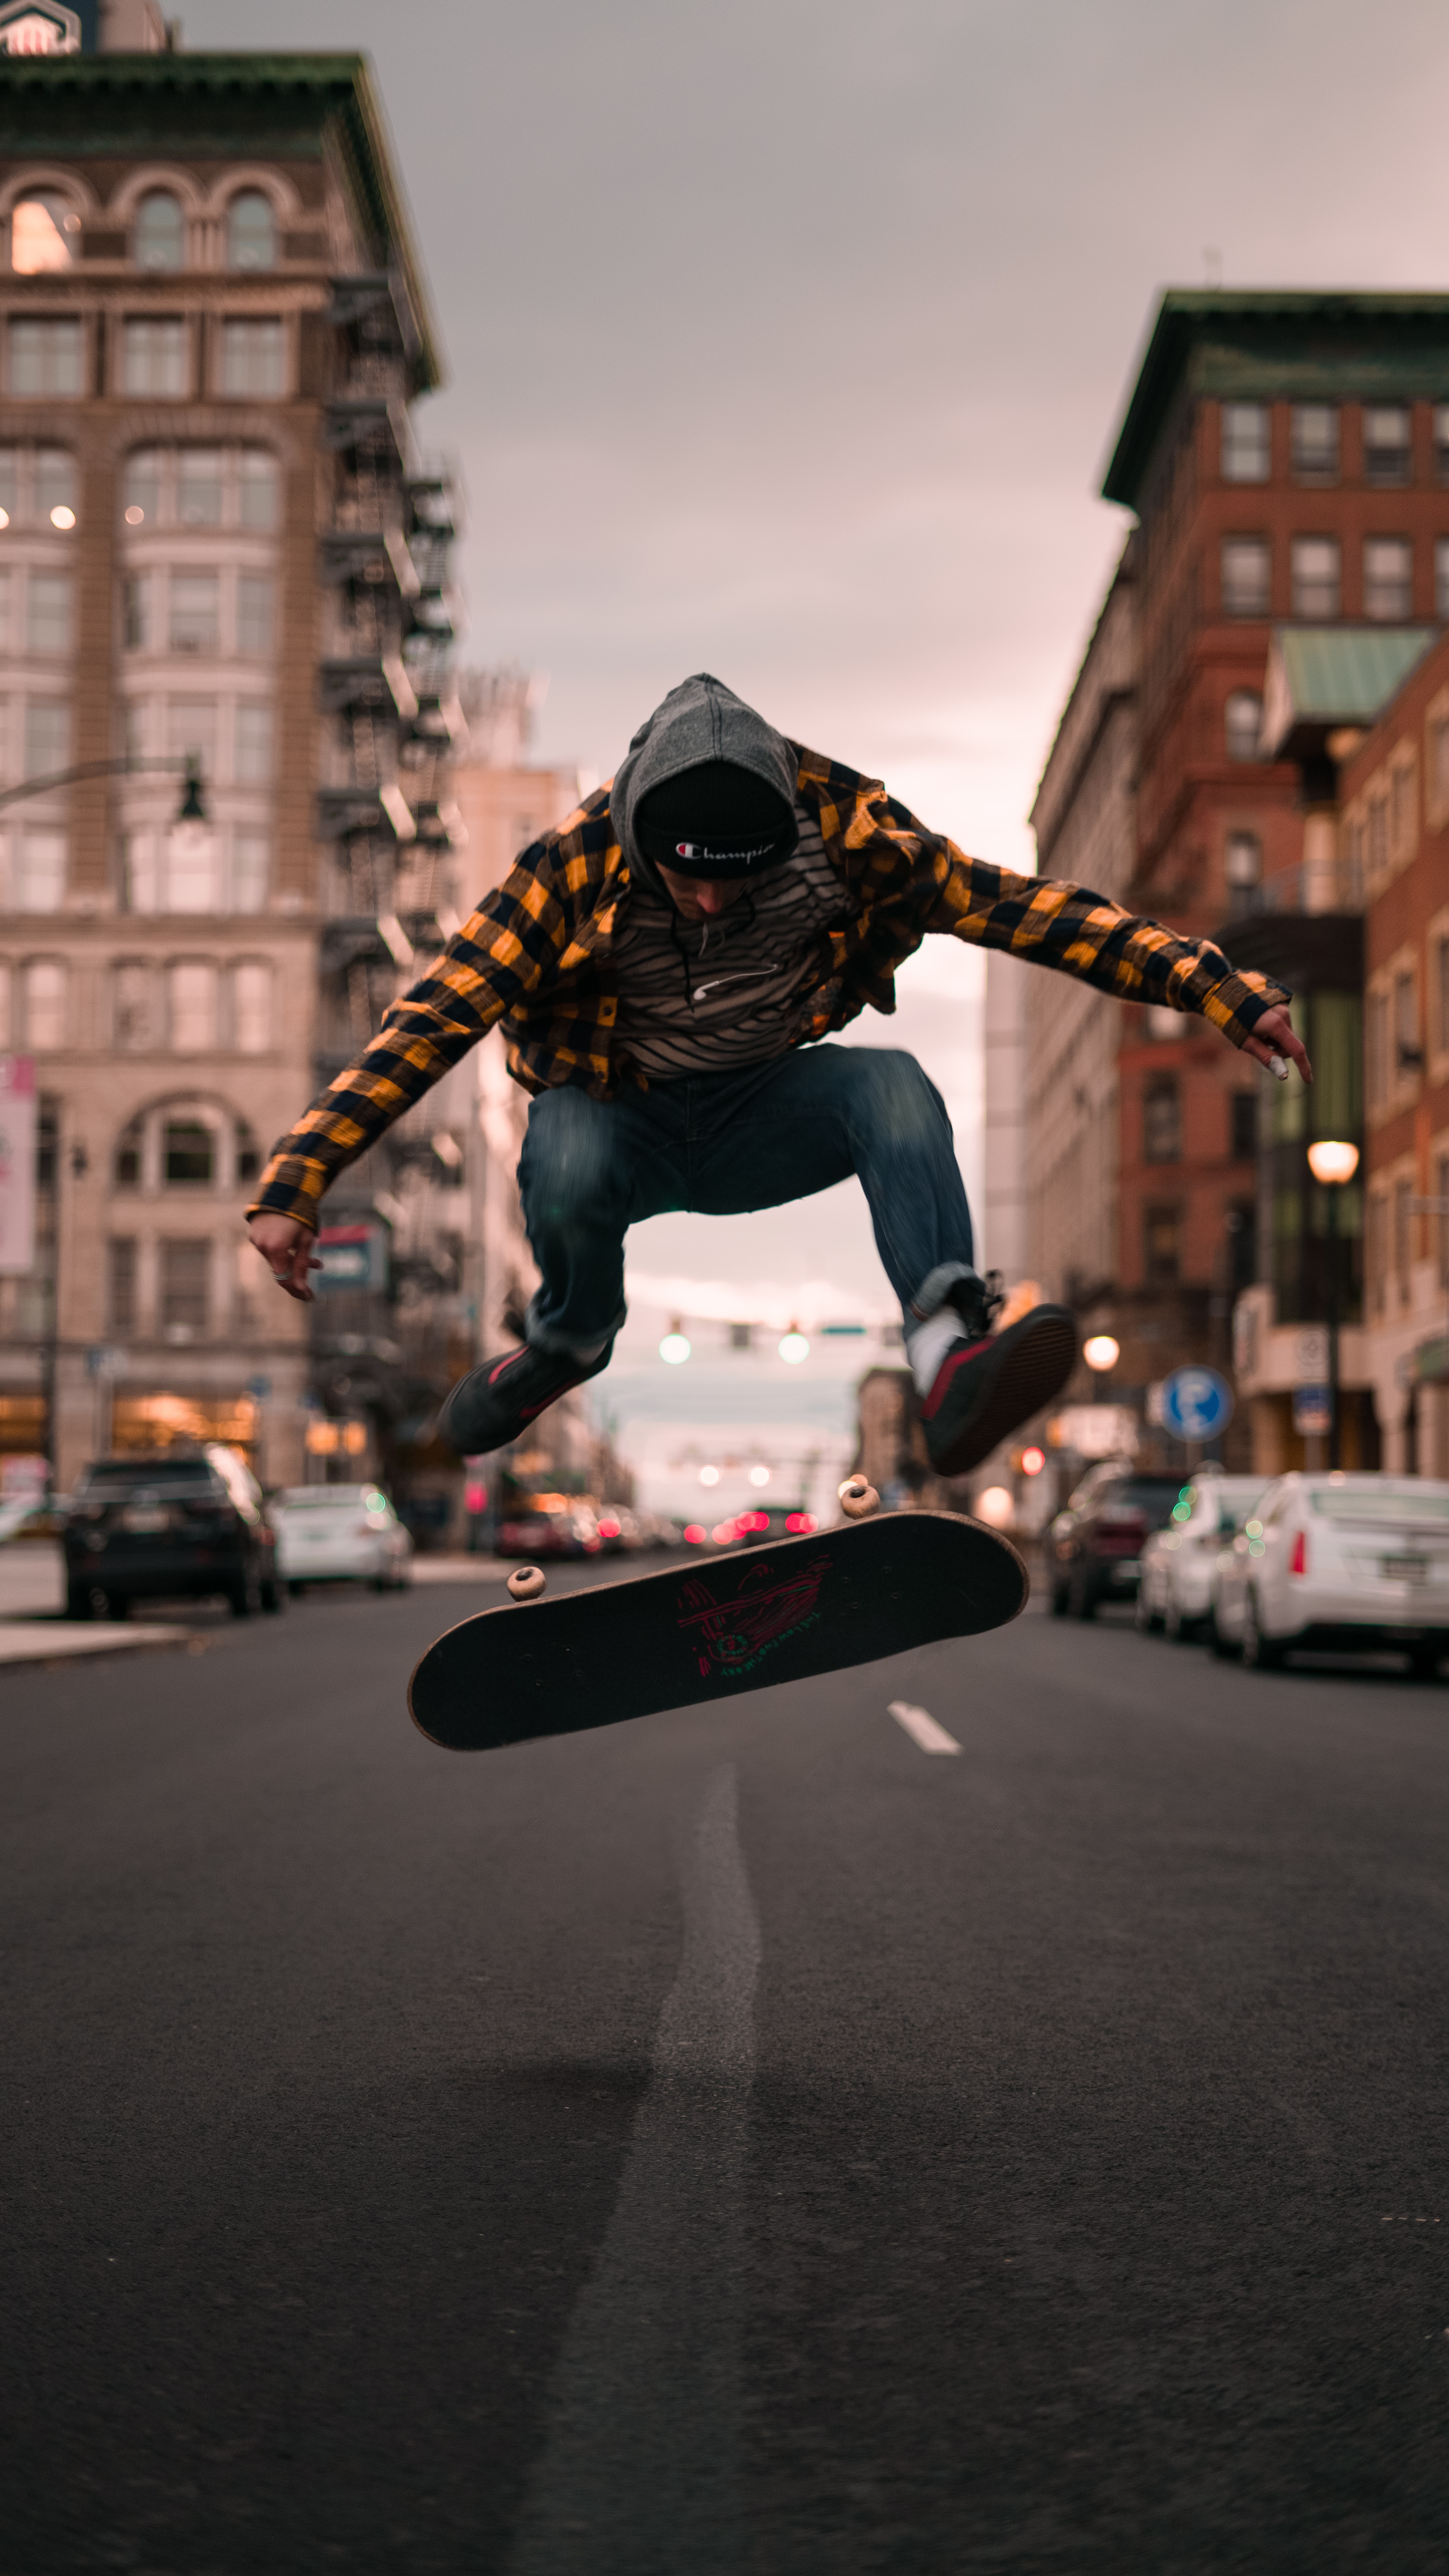 jump, miscellanea, miscellaneous, human, person, bounce, trick, skateboard, skate for android